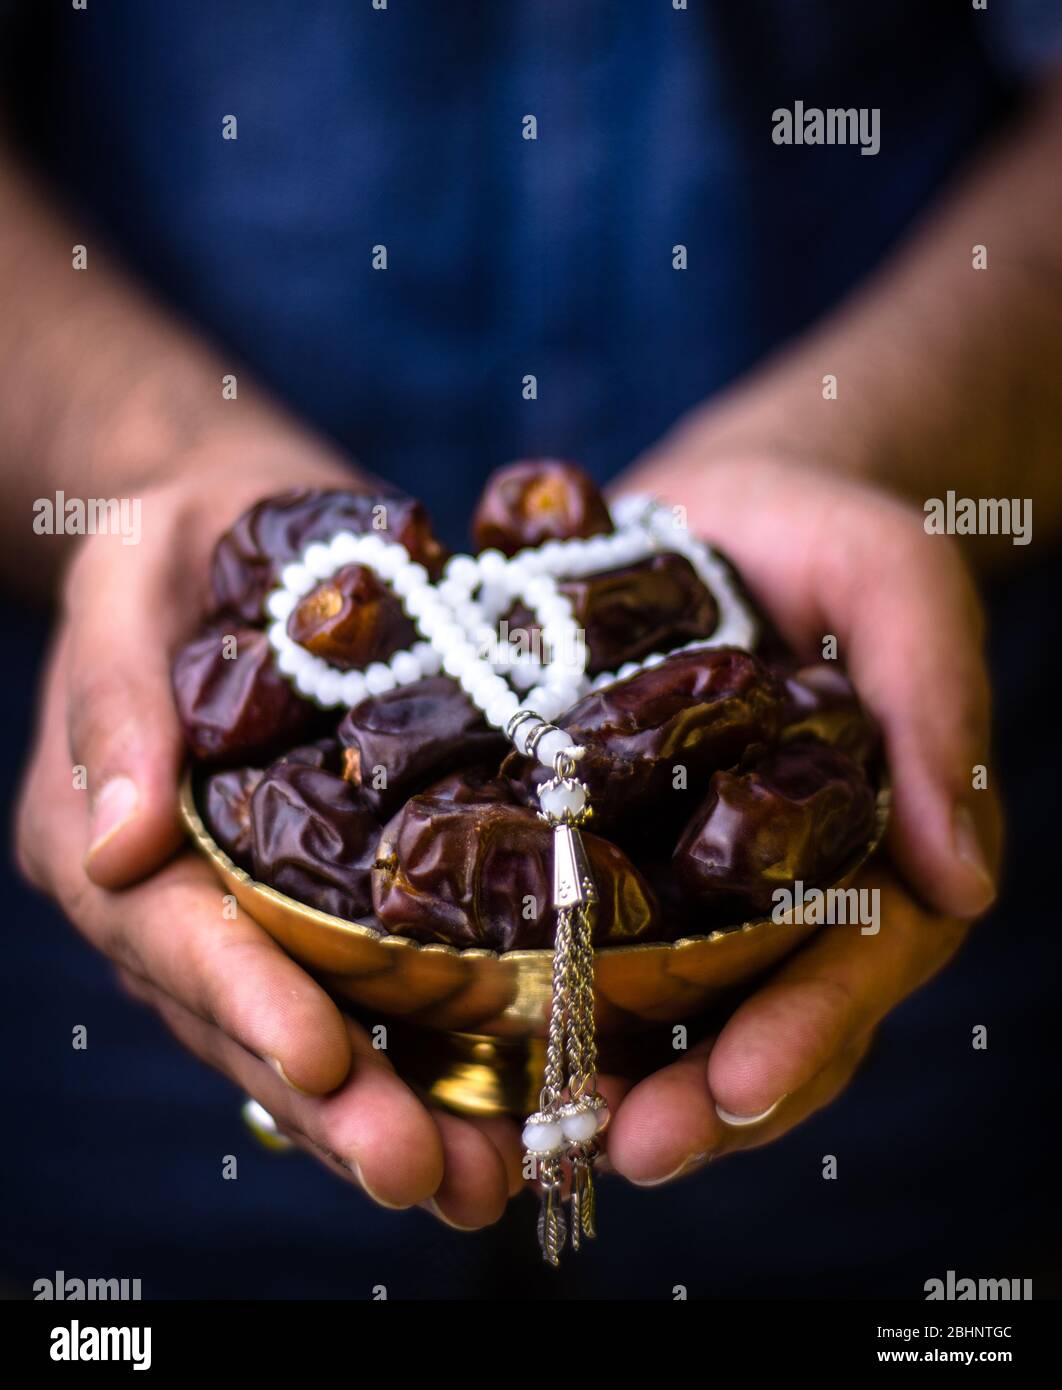 Ramadan Background holding dates in his hands with tasbeeh ramadan mubarak concept, fasting and iftar fruits islamic background Stock Photo